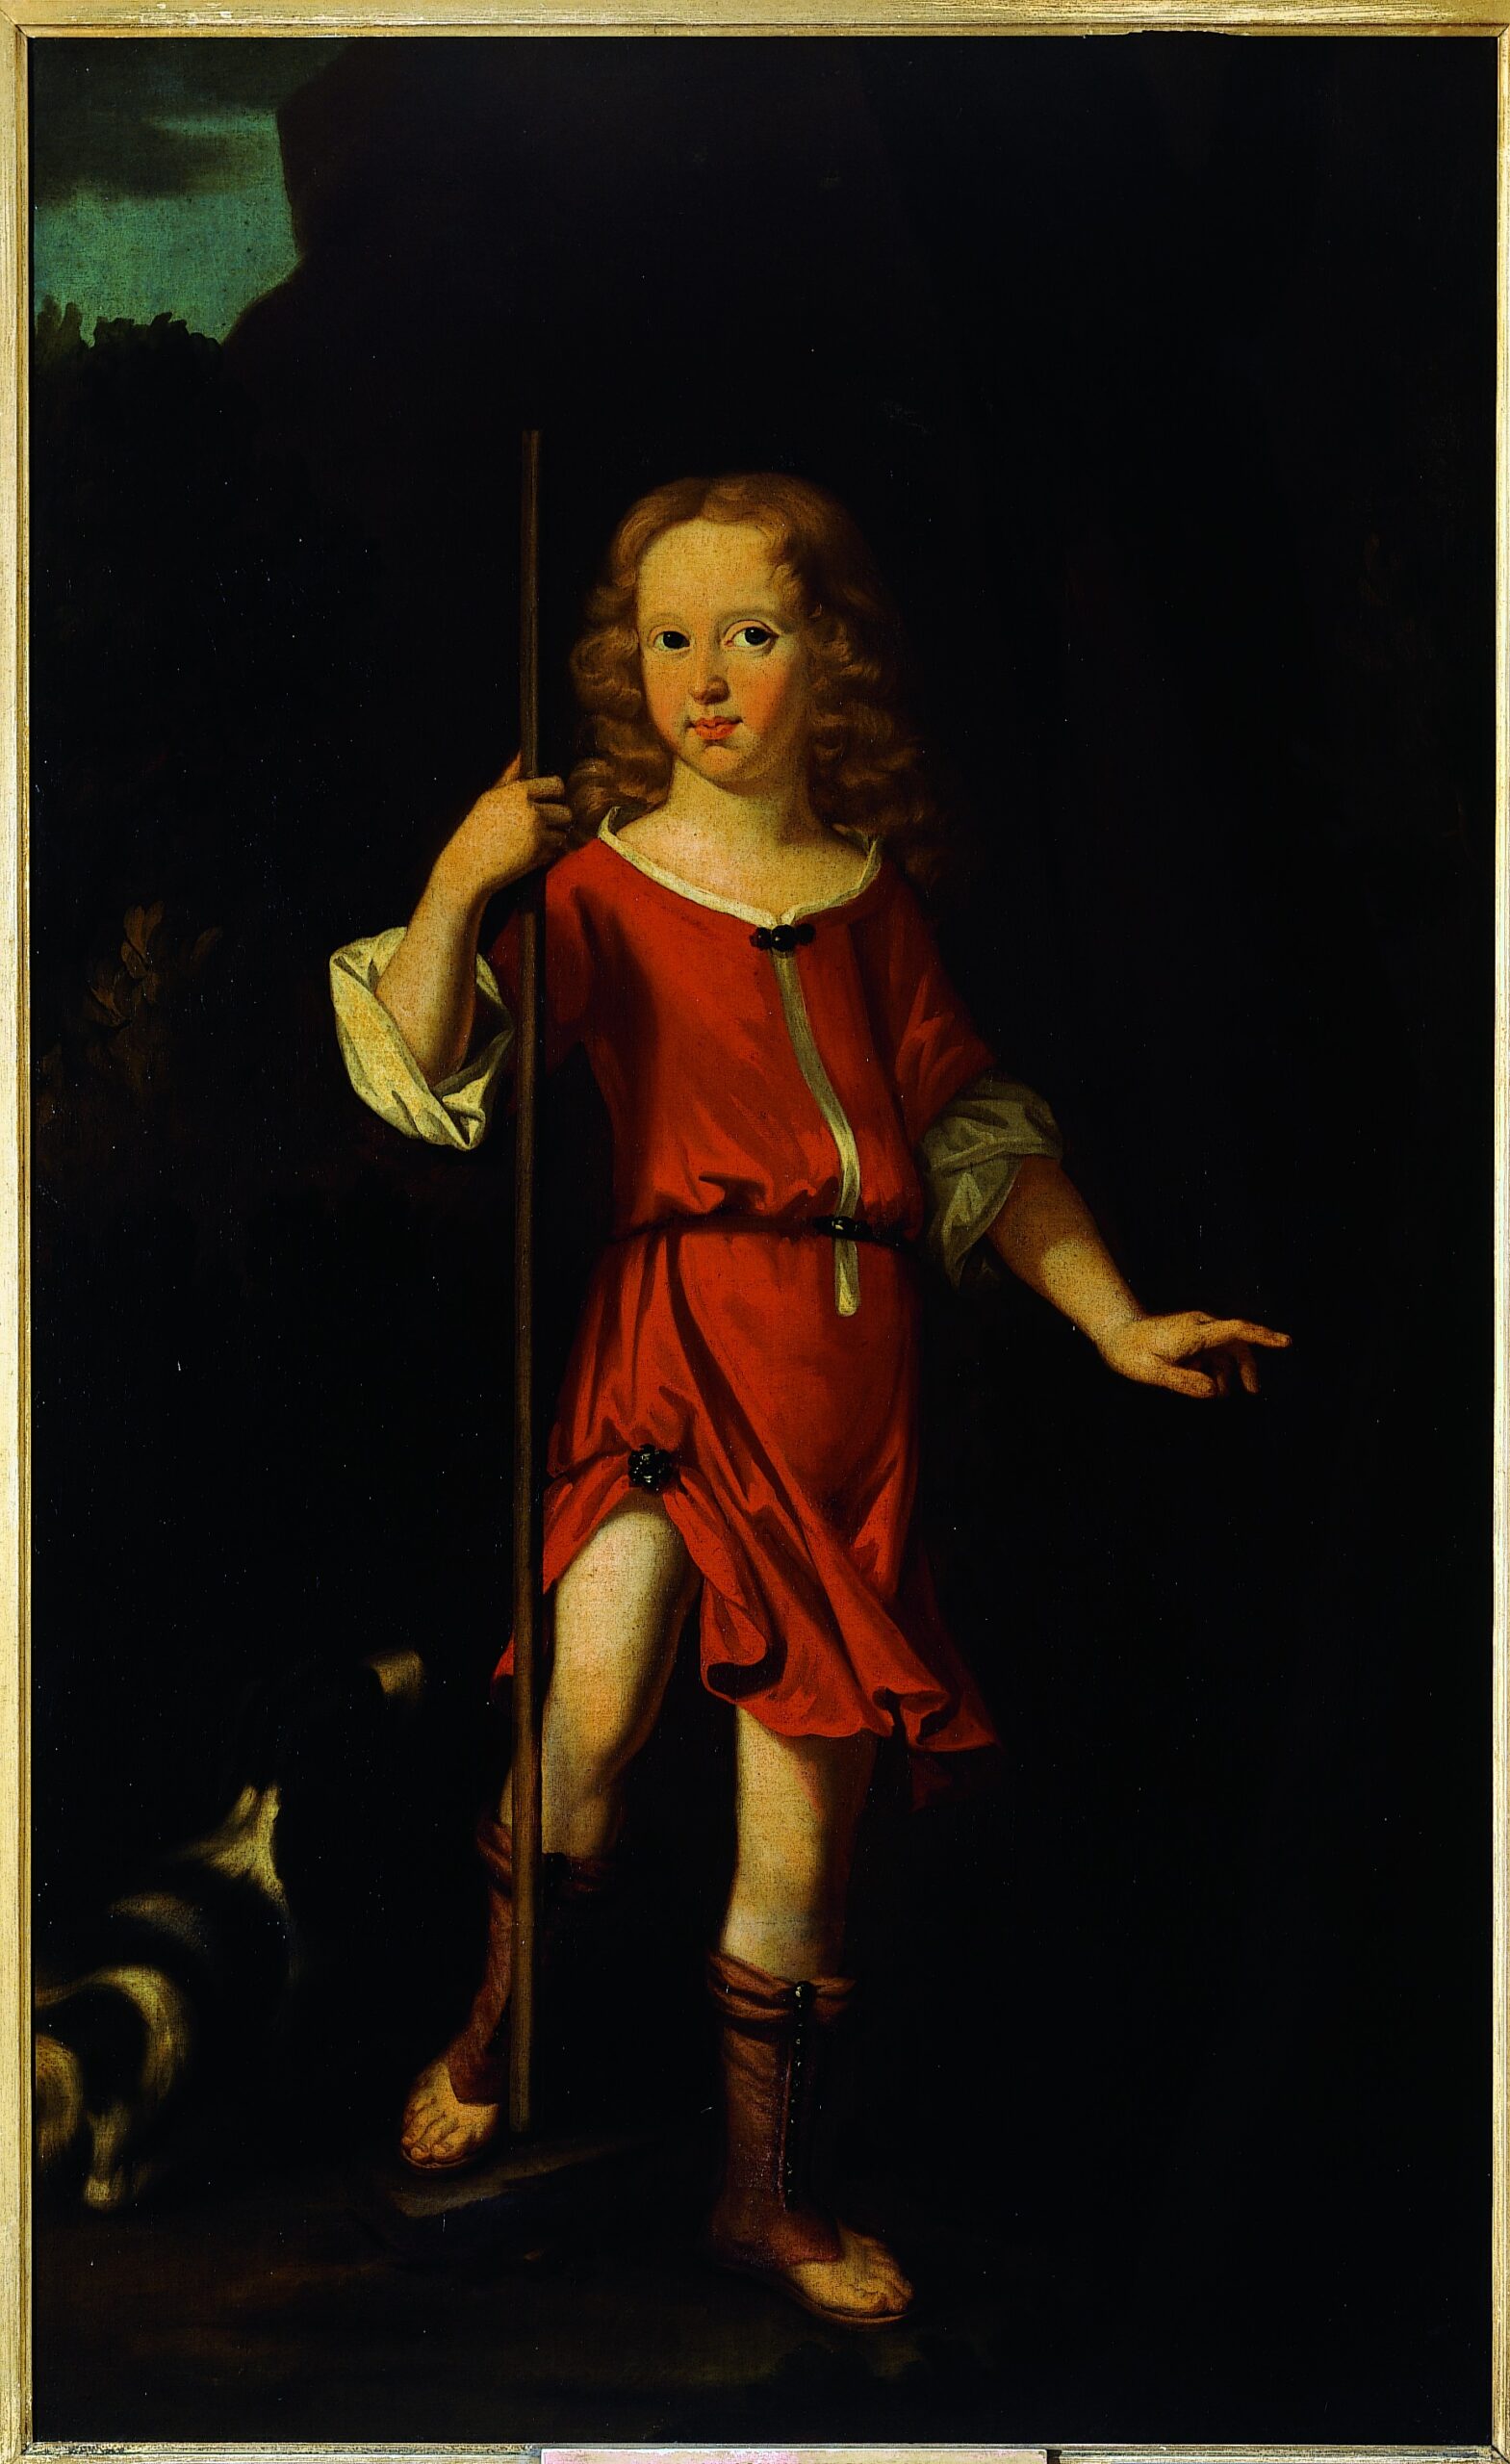 A colourful portrait of a young boy with long golden hair in a red tunic